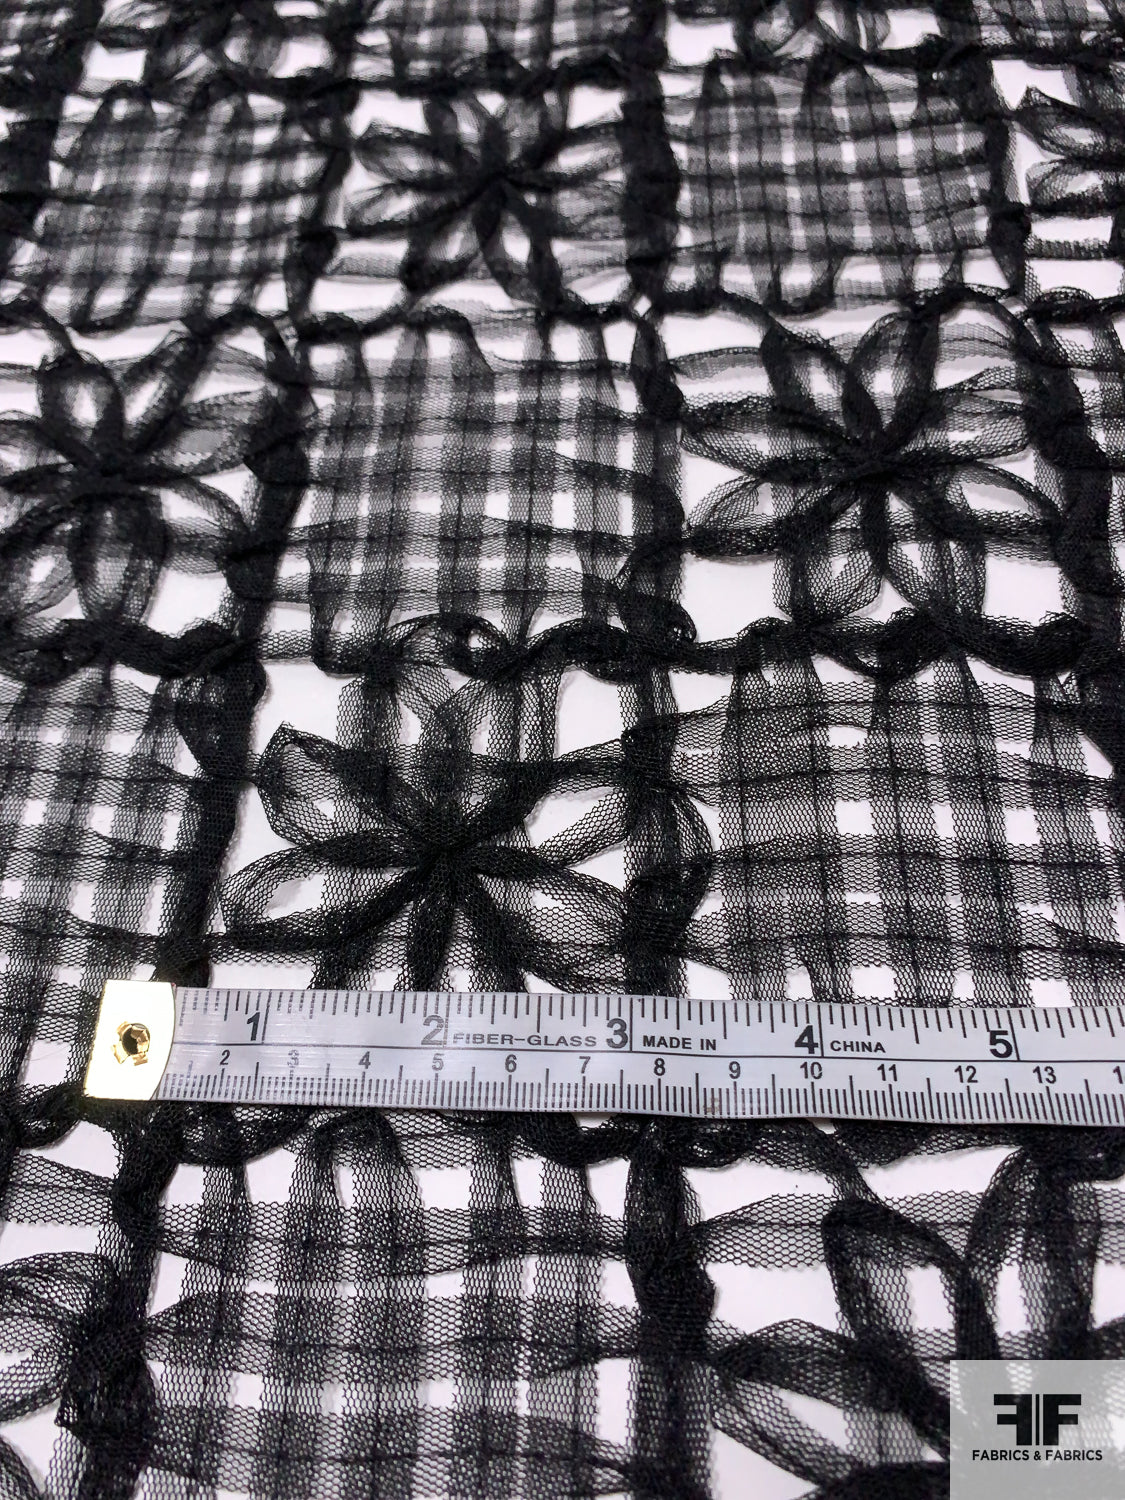 Open Stitched Tulle Strips in Floral Checkerboard Design - Black